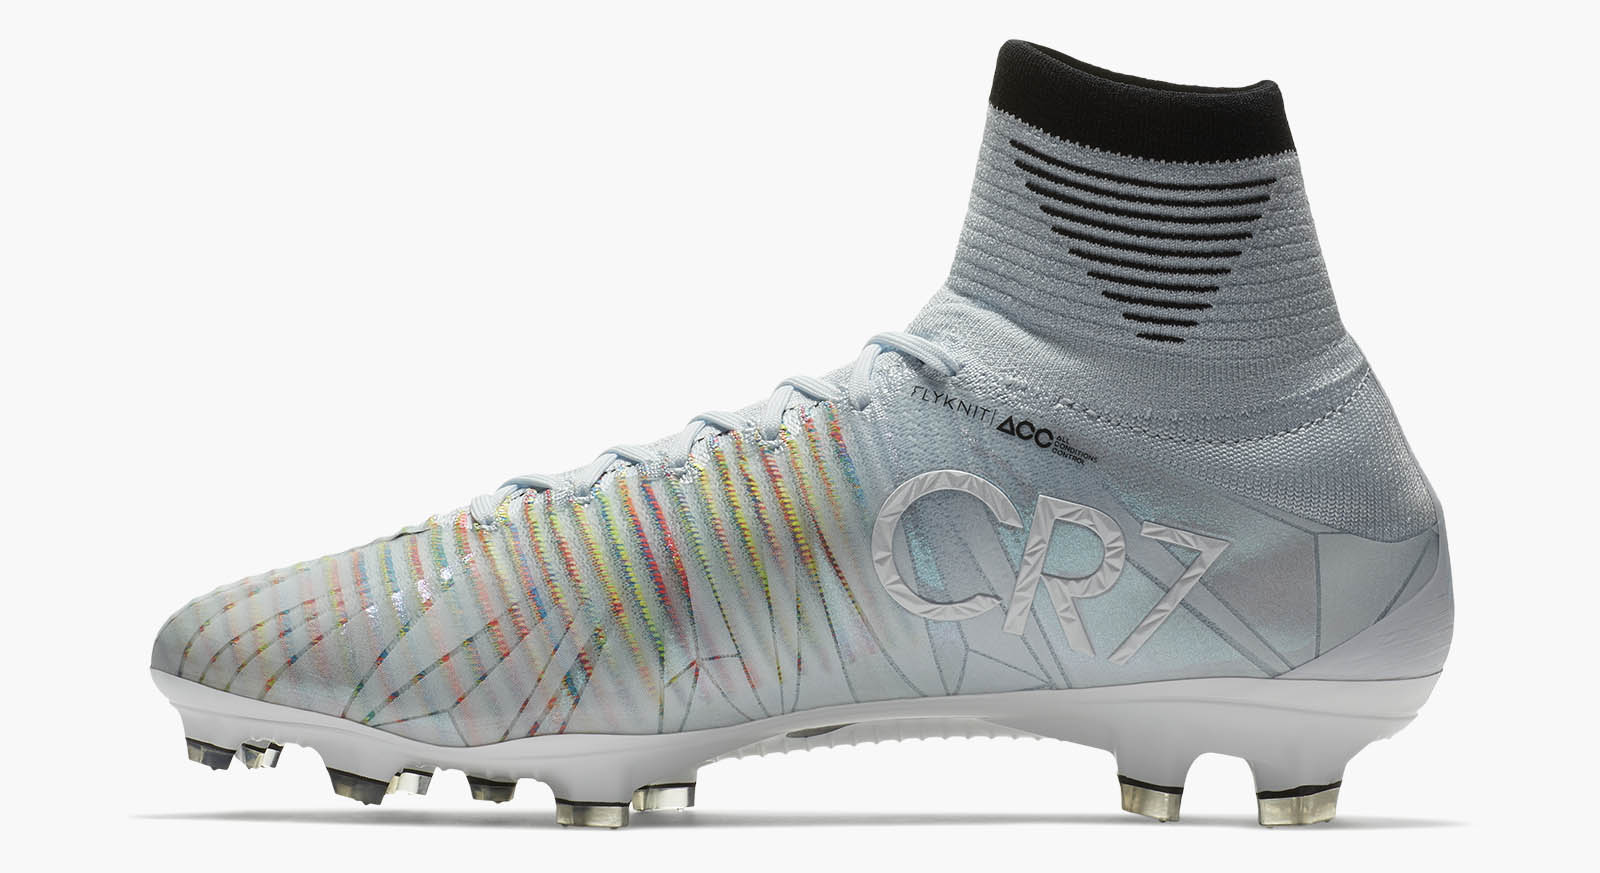 Deshonestidad Caramelo Independencia Nike Mercurial Superfly V Cristiano Ronaldo Chapter 5 'Cut to Brilliance'  Boots Released - Footy Headlines